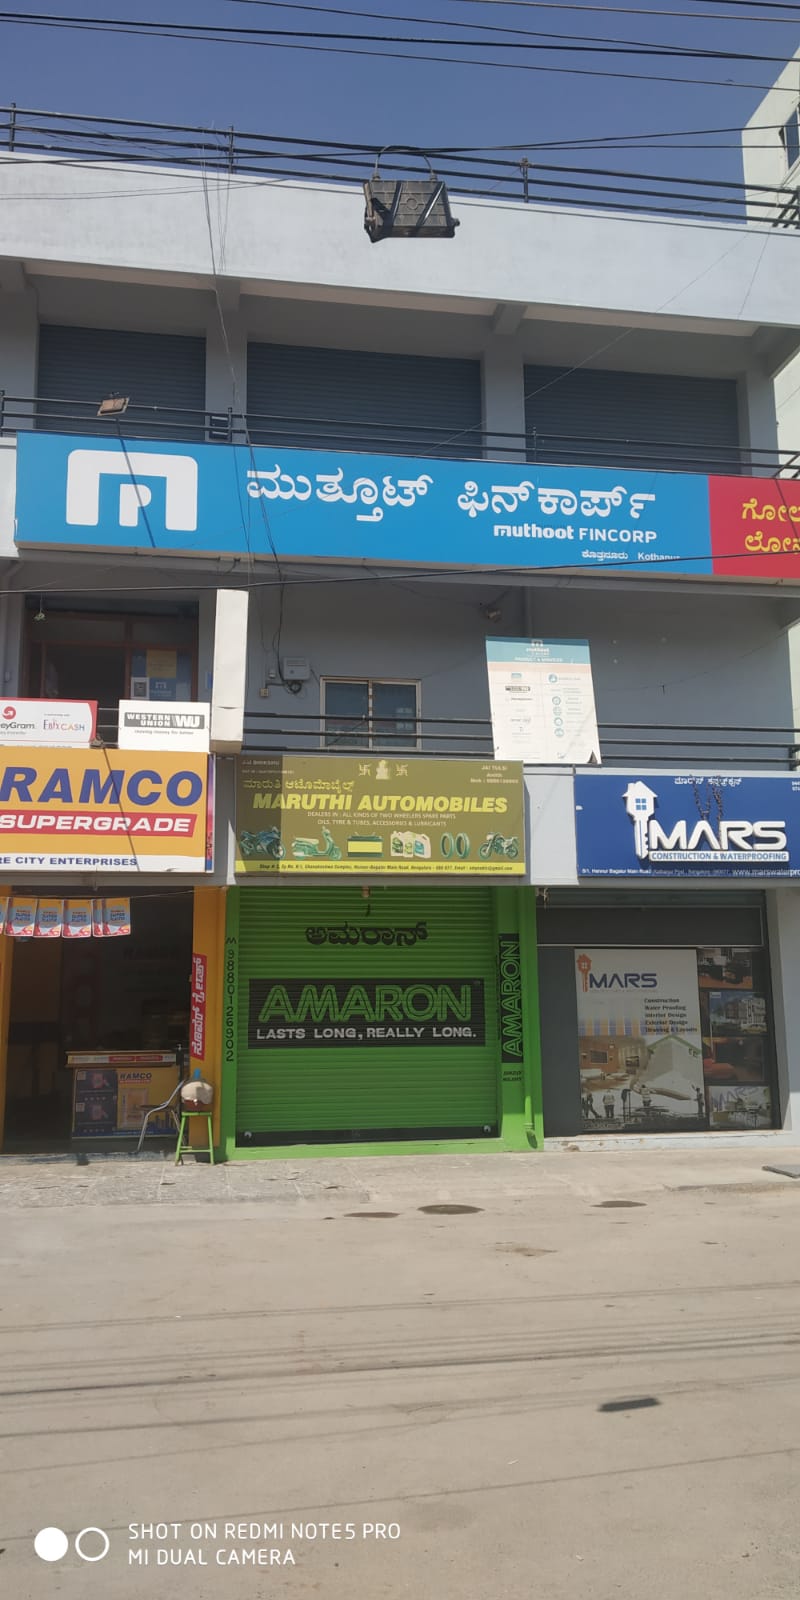 Photos and Videos of Muthoot Fincorp Gold Loan in Kothanur, Bangalore